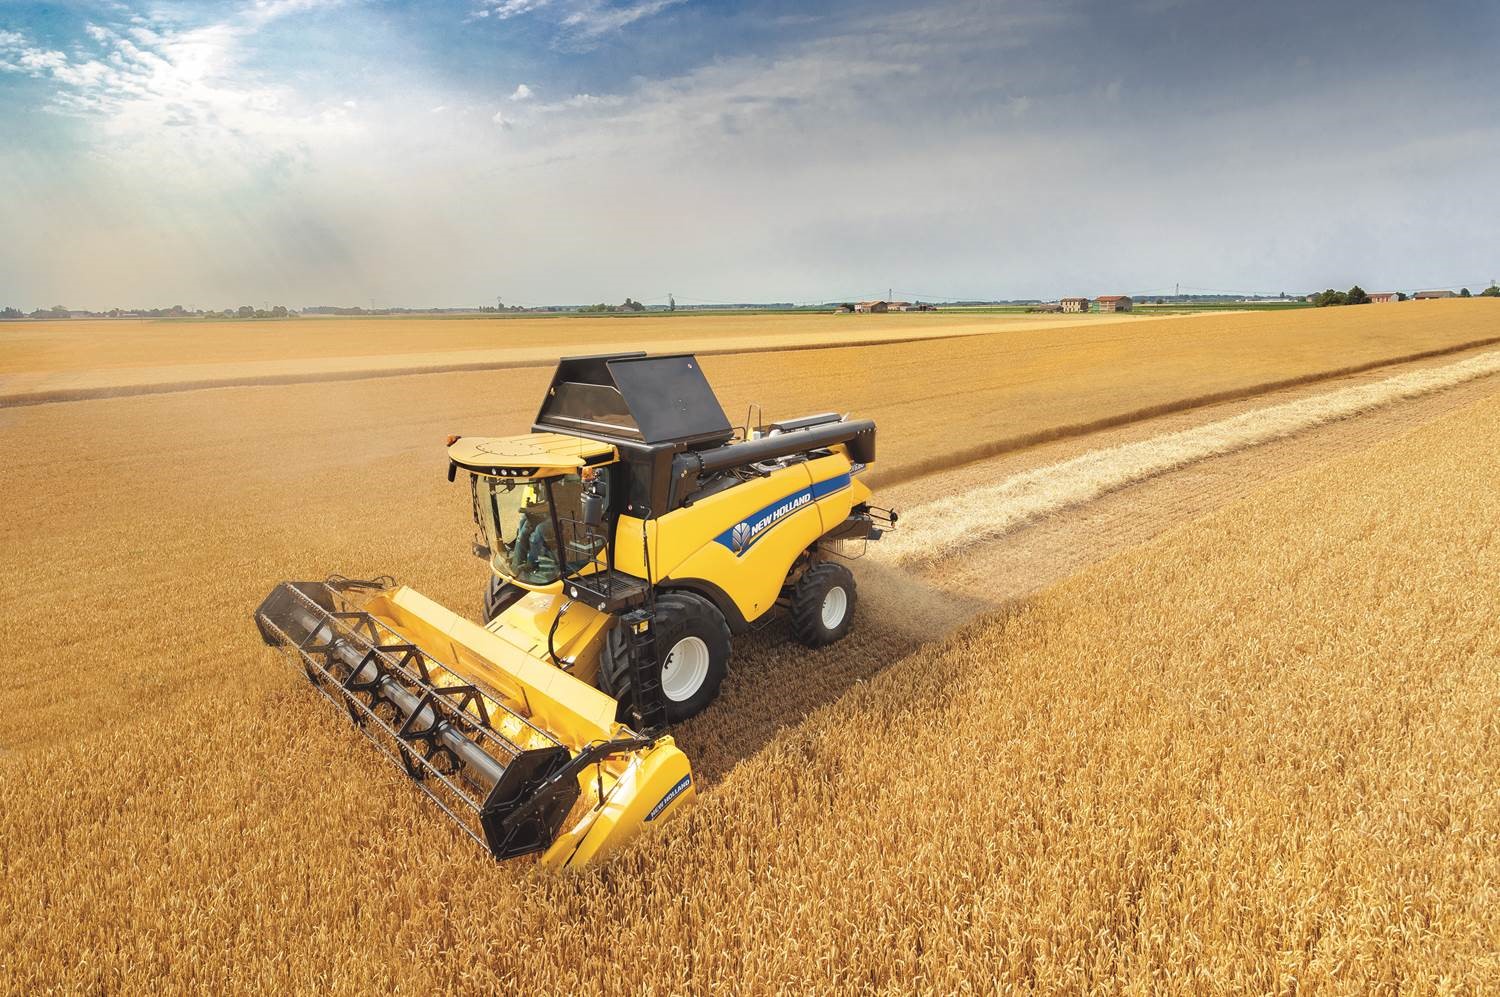 New Holland launches new CX6 Series combines